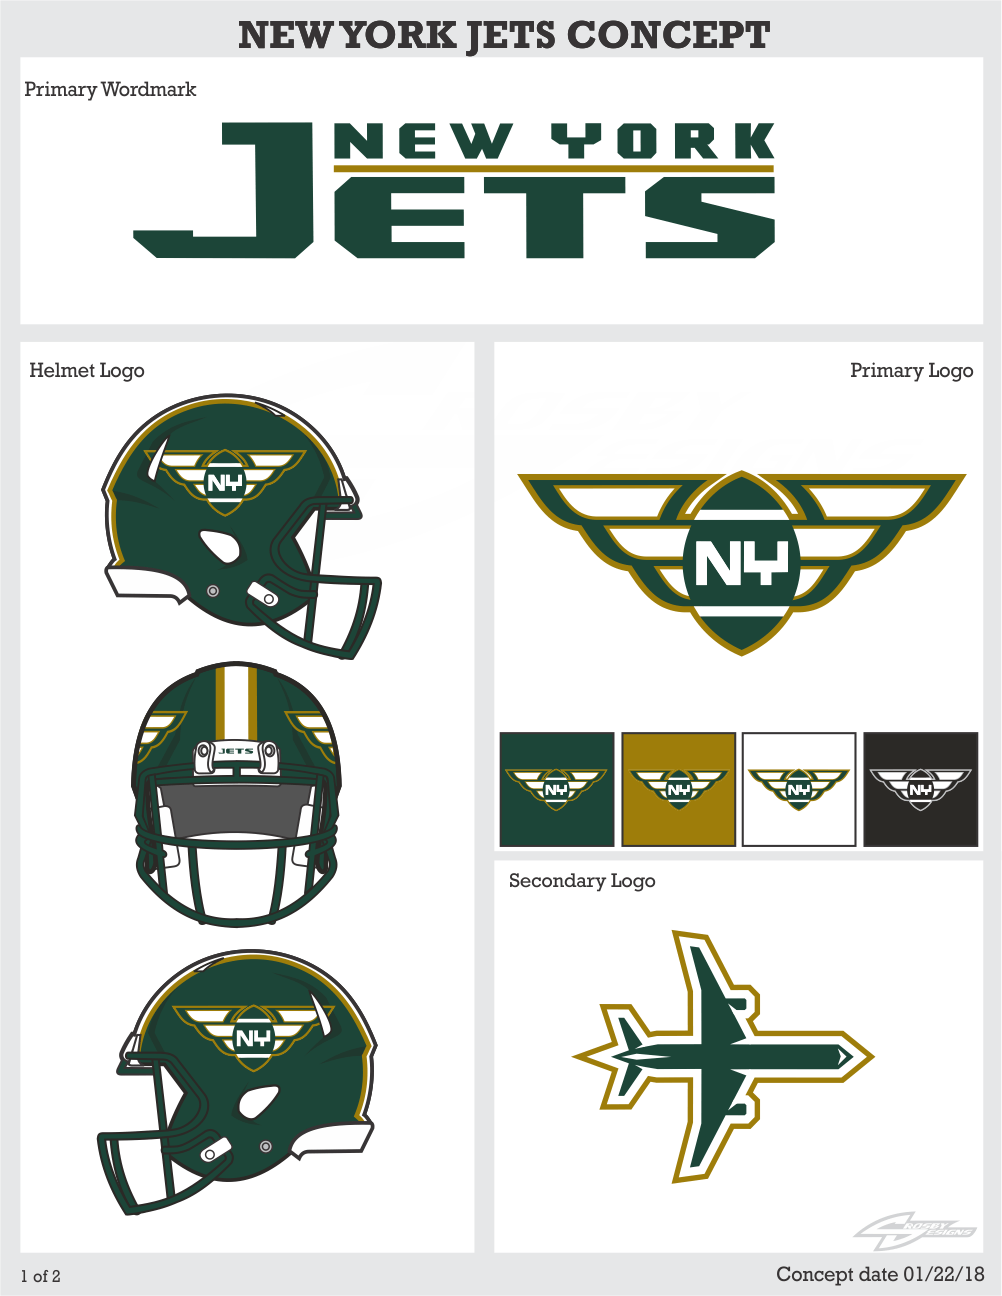 New York Jets New Logo - New York Jets concept (final version added) - Concepts - Chris ...